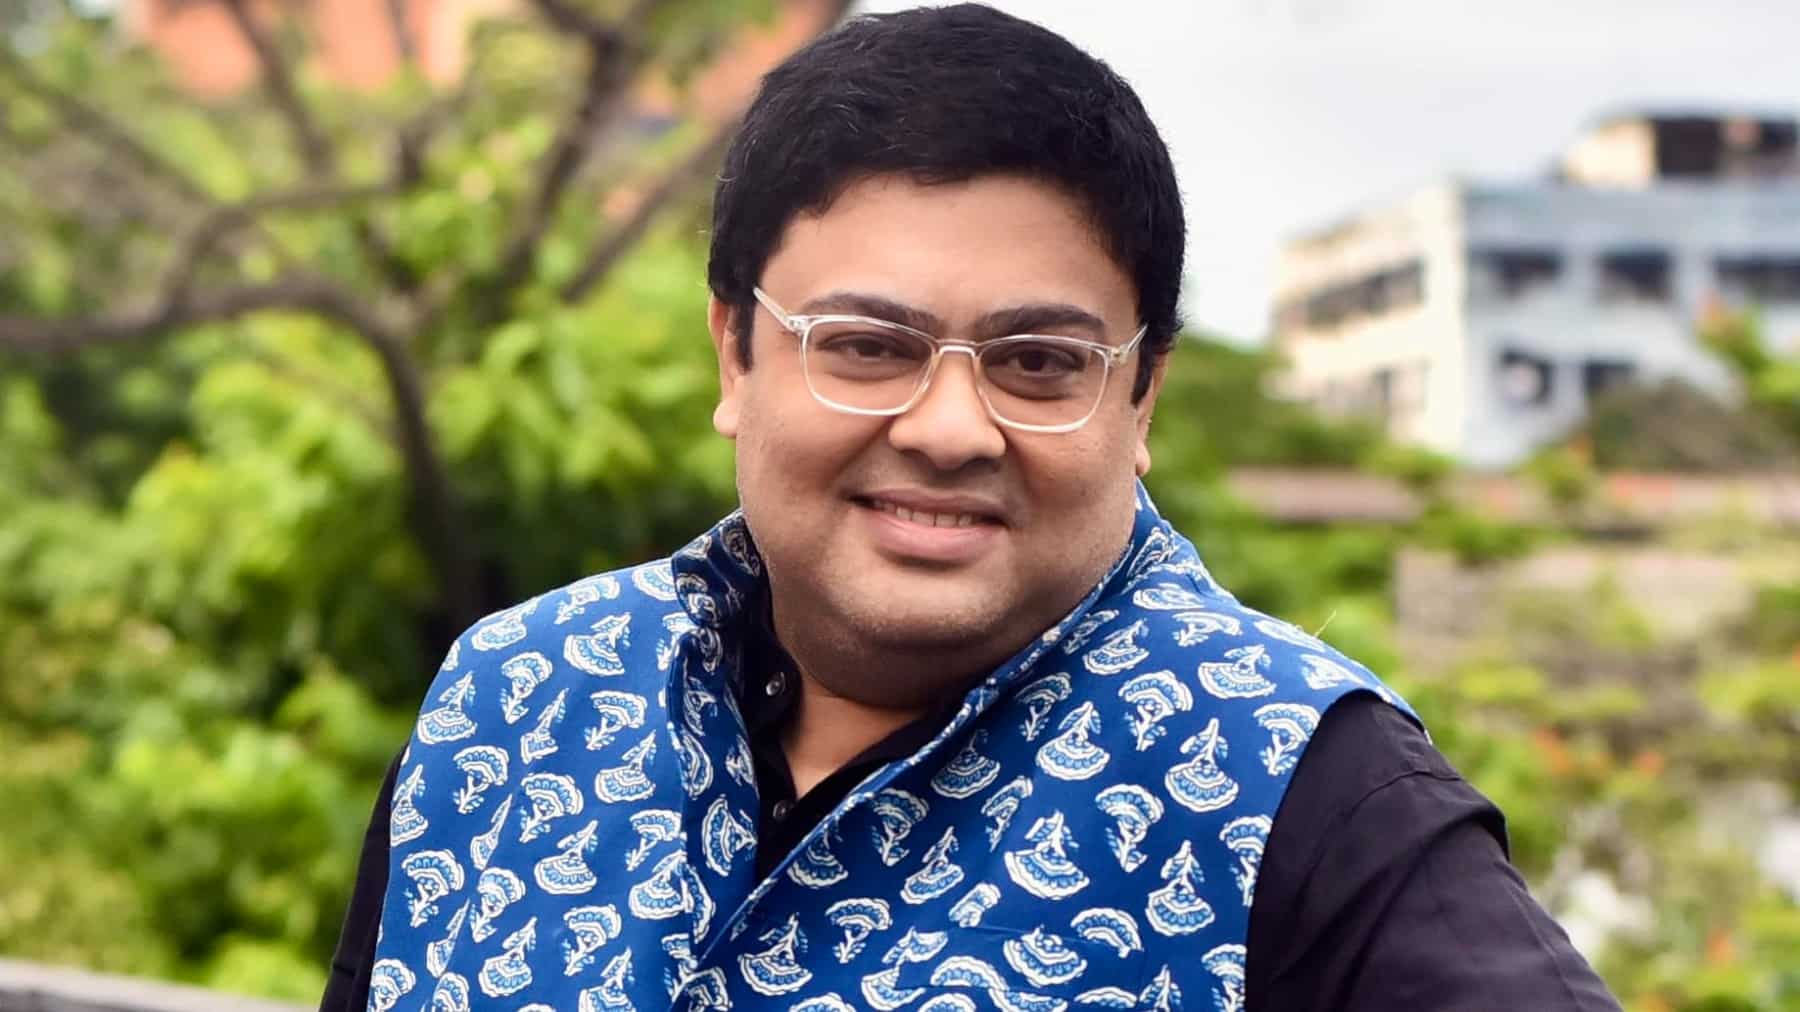 https://www.mobilemasala.com/movies/Ambarish-Bhattacharya-opens-up-about-his-characters-in-Ajogyo-and-Boomerang-i267115